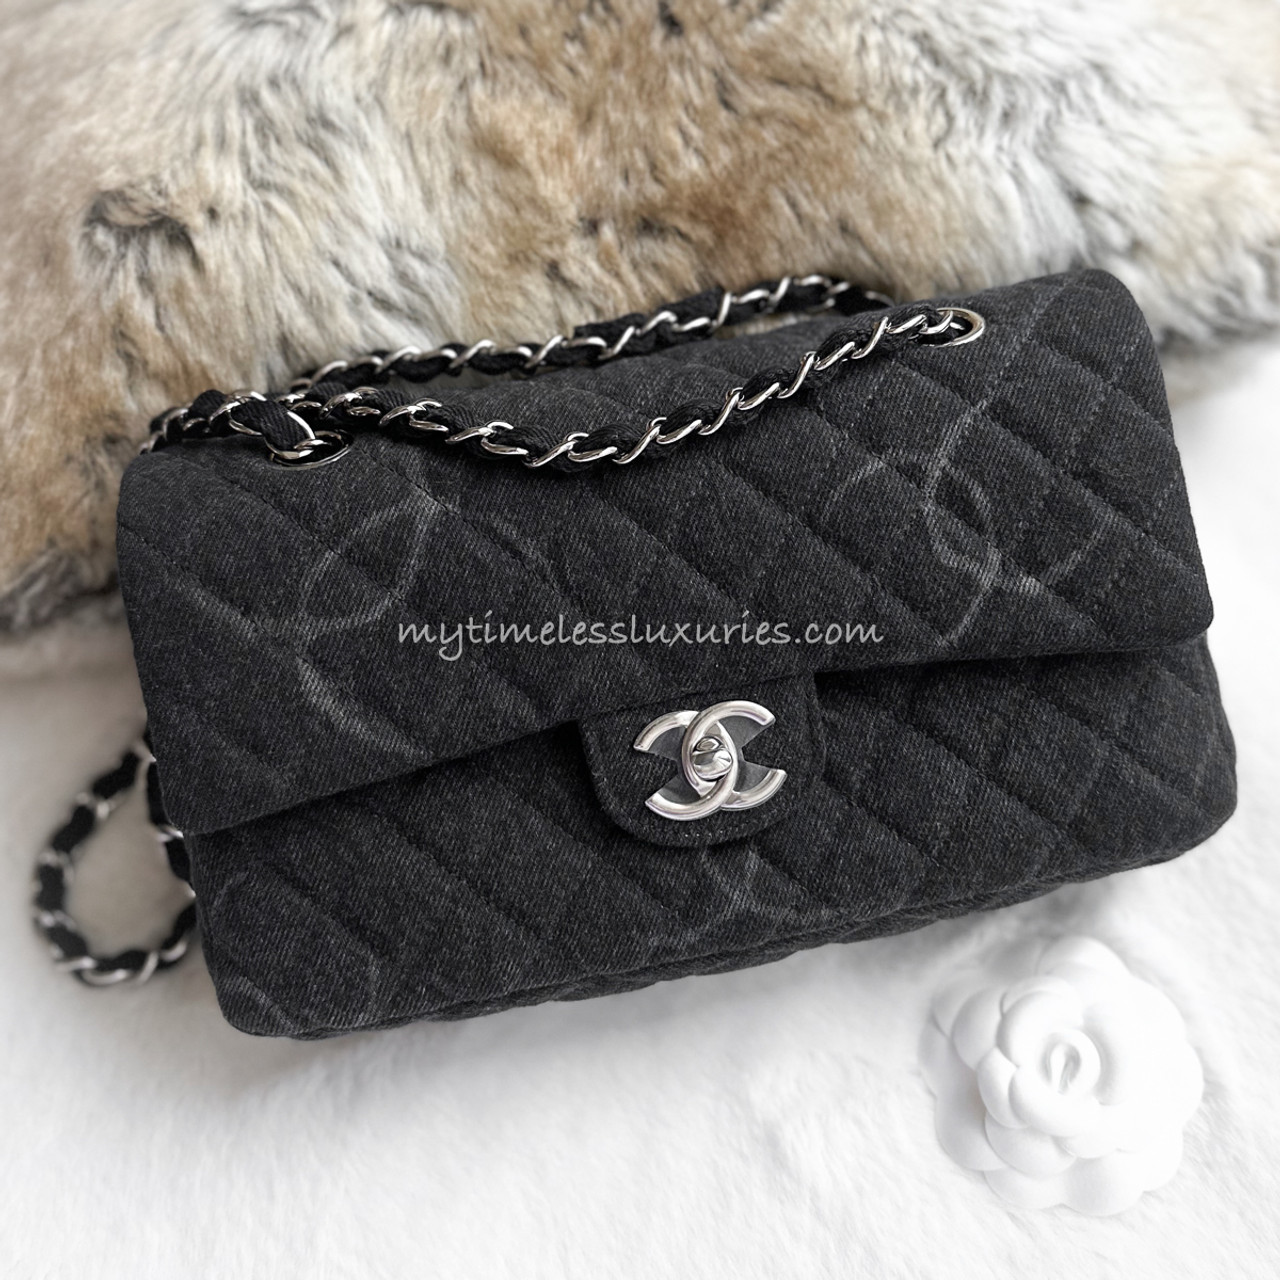 Authentic CHANEL Classic Flap Wallet Black Lambskin Leather ~ Medium Size